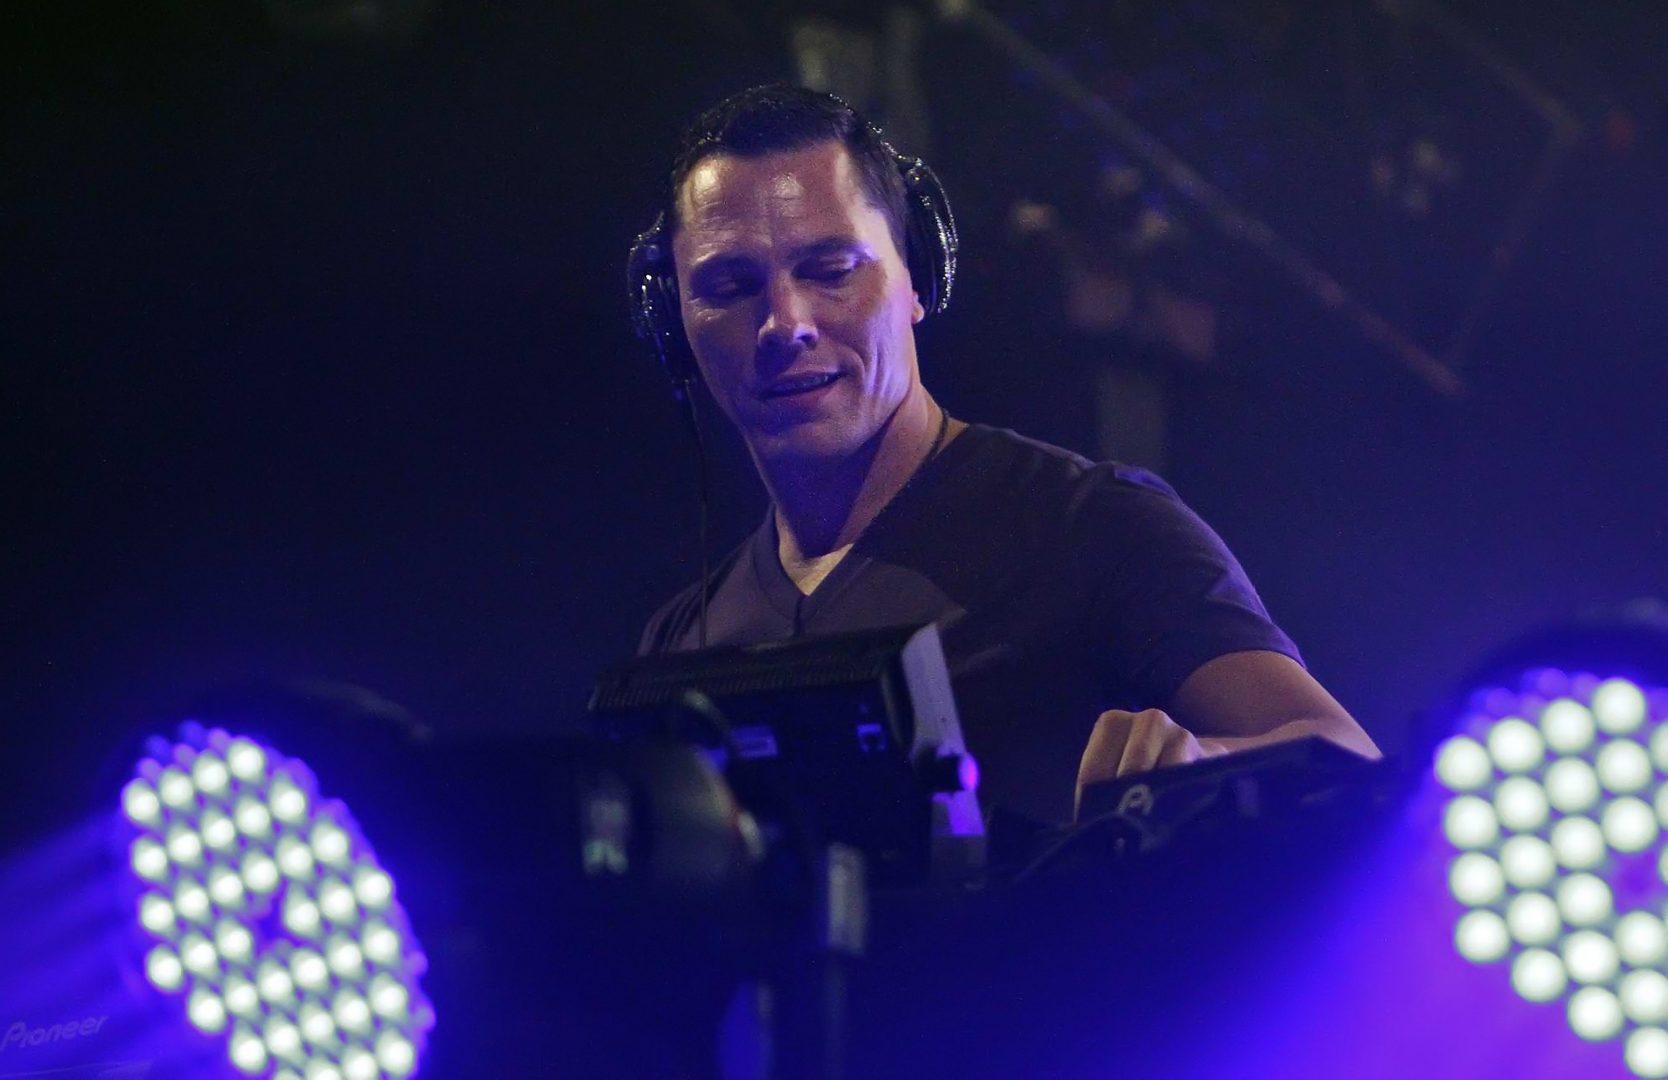 Lawerence+K.+Ho+%2F+Los+Angeles+Times+%2F+MCT%0ADJ+Tiesto+performs+at+the+San+Diego+Sports+Arena+in+October+2011.